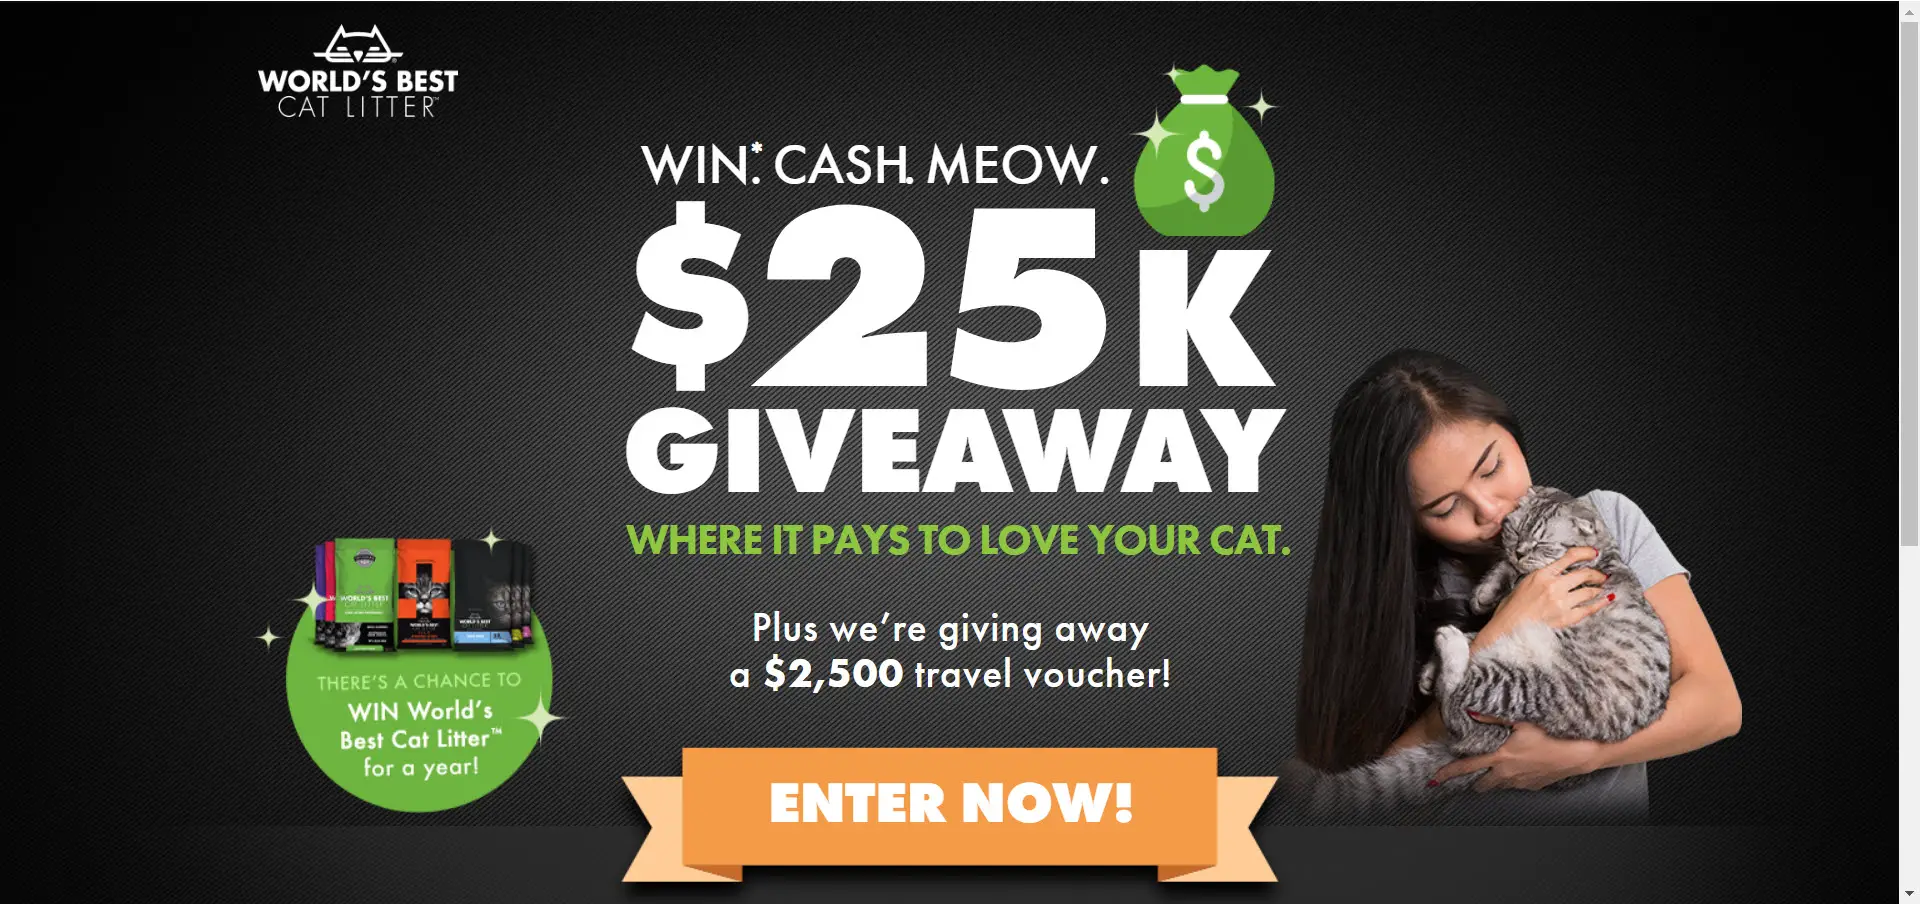 WIN. CASH. MEOW! Enter for your chance to win $25,000 and other prizes when you enter the World's Best Cat Litter Win Cash Meow $25K Giveaway. Other prizes up for grabs include a $2,500 Liberty Travel  Voucher and World's Best Cat Litter!